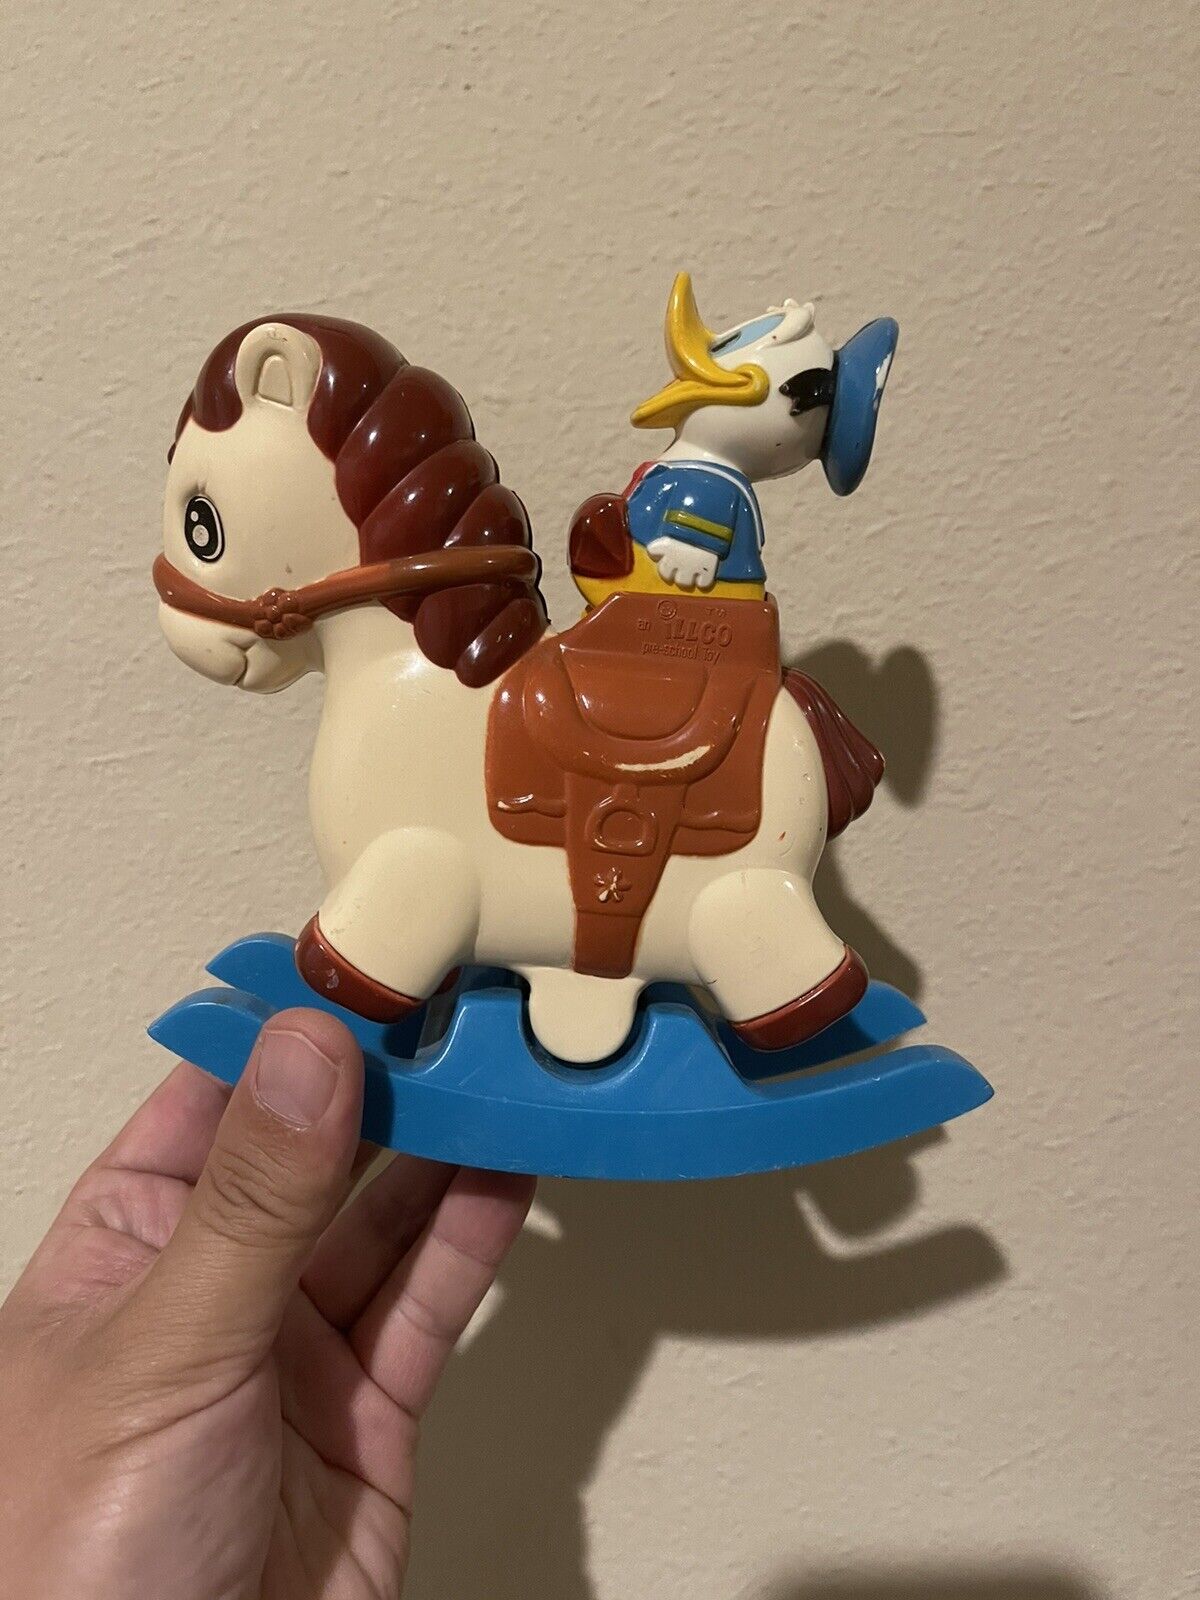 Rare Vintage Illco Disney Donald Duck Rocking Horse Wind-up Musical Toy